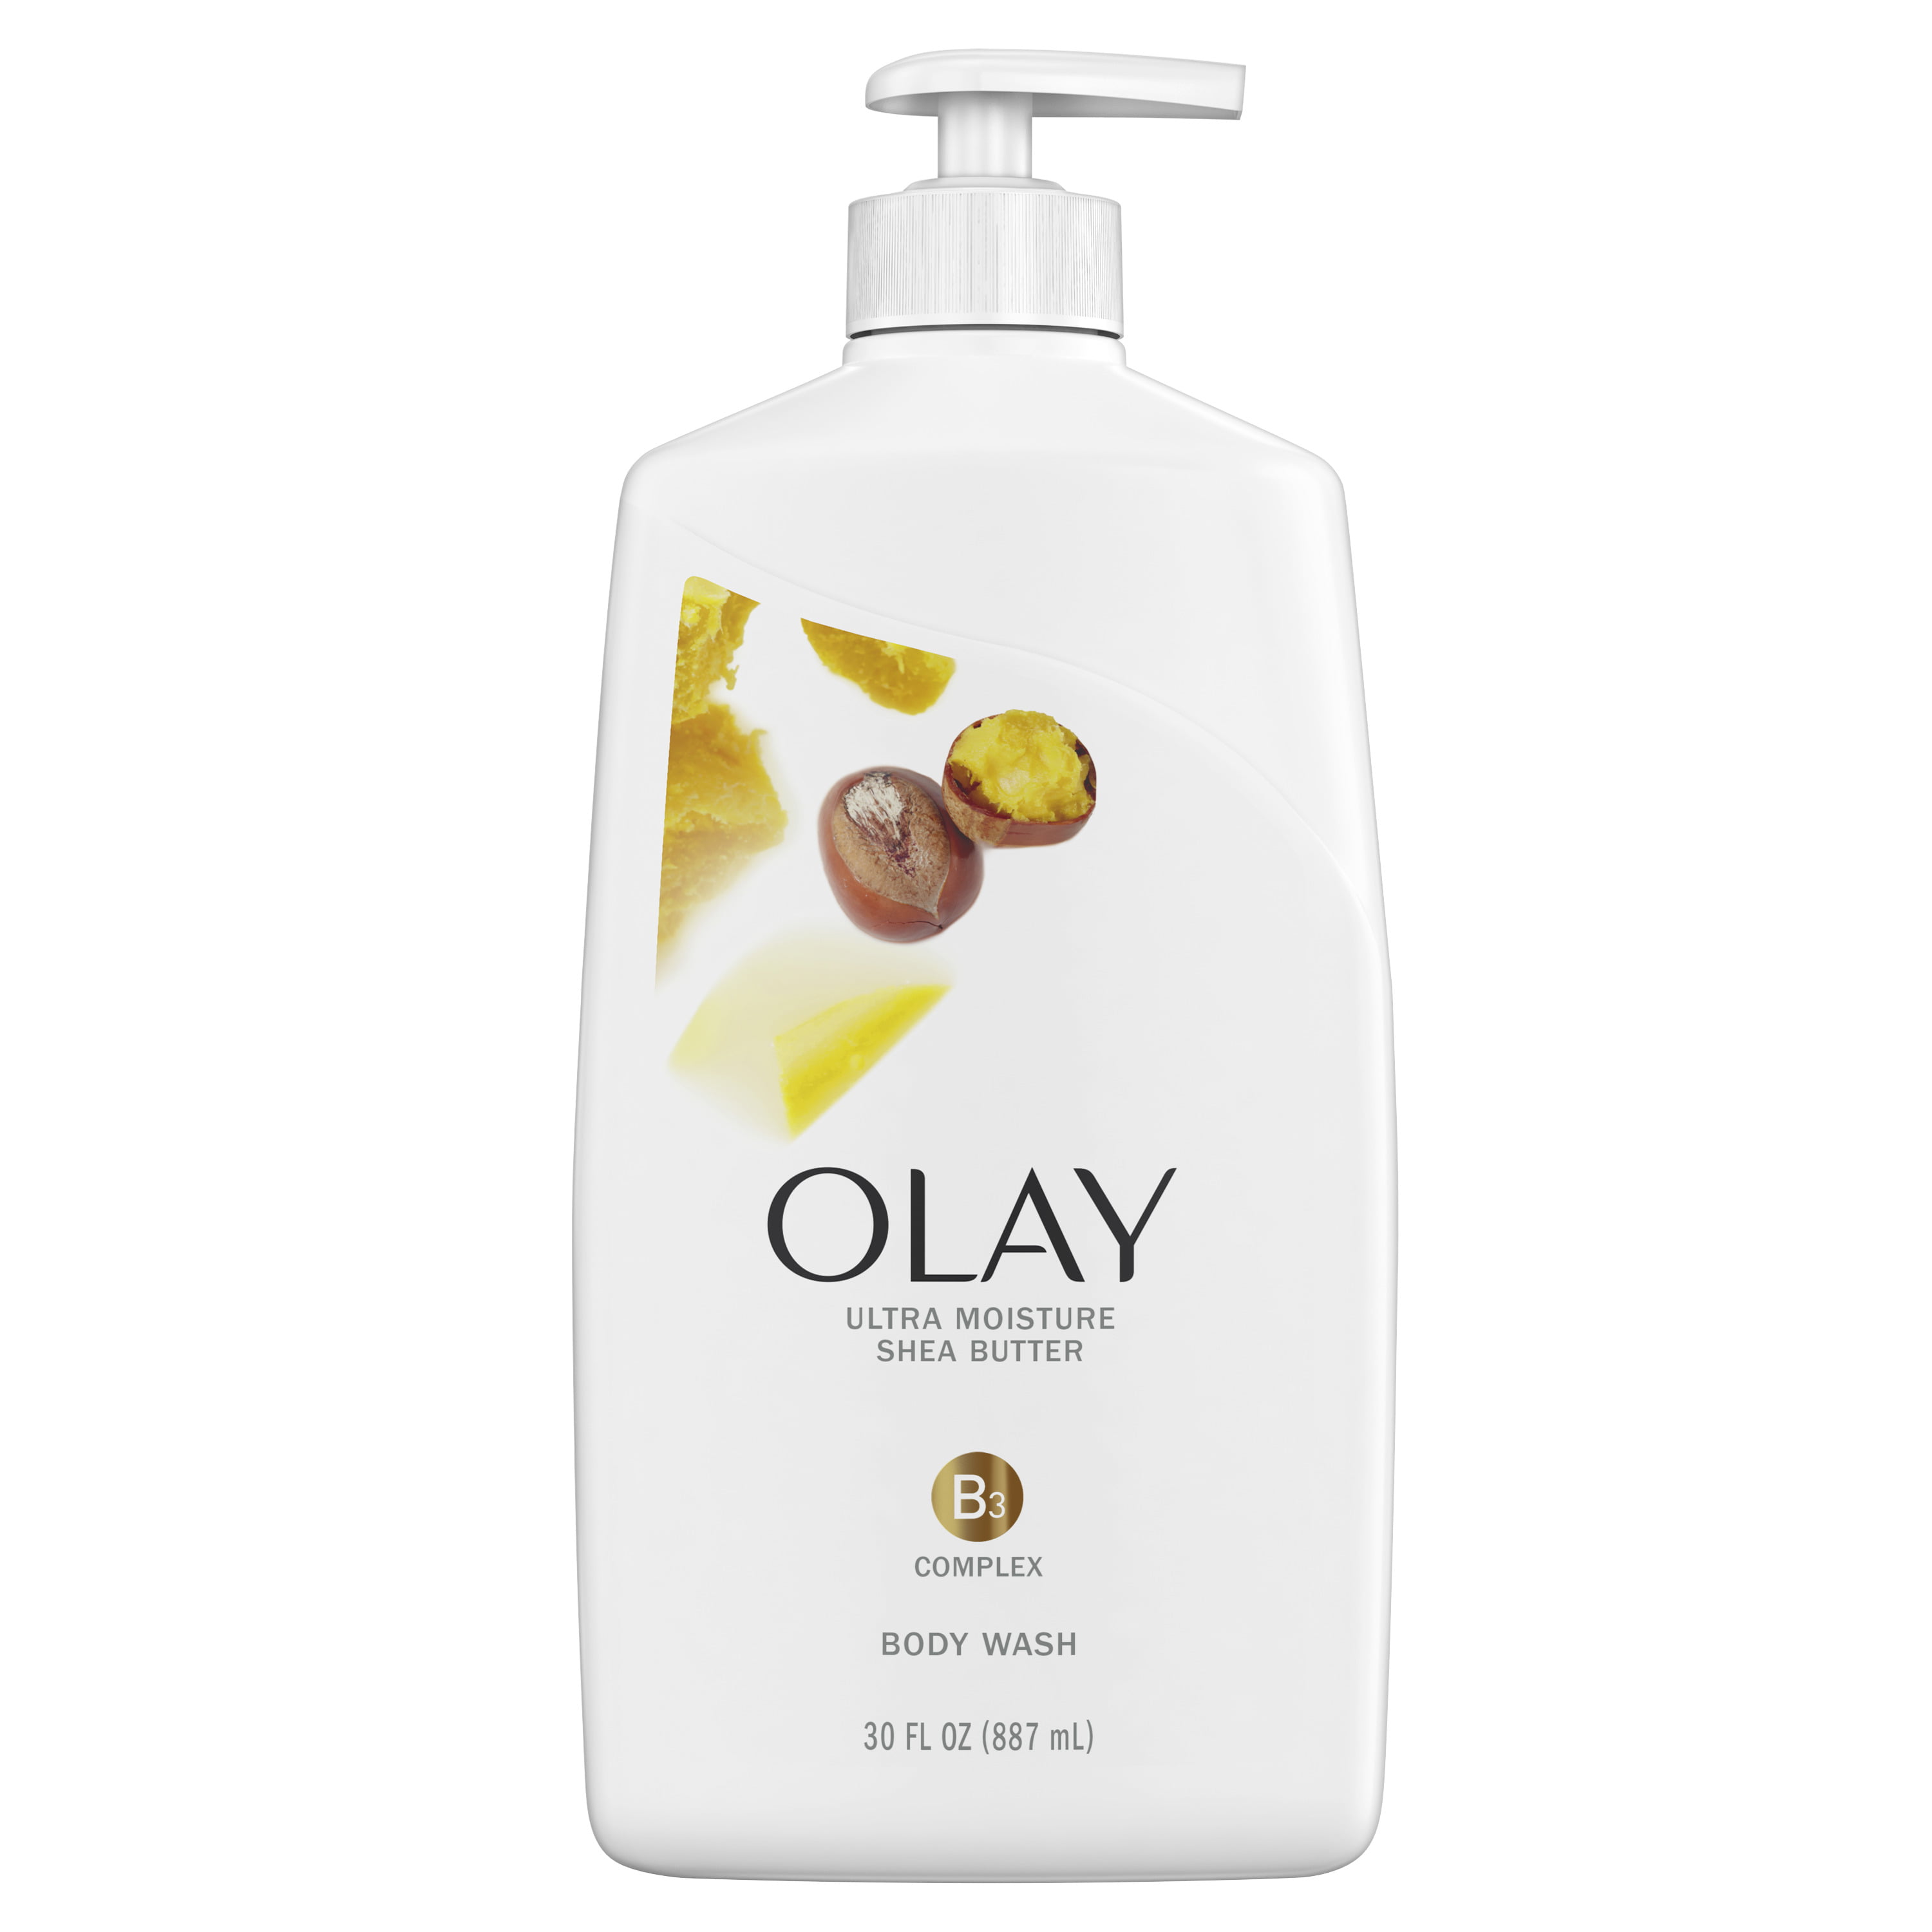 Olay Ultra Moisture Body Wash for Women with Shea Butter, 30 fl oz